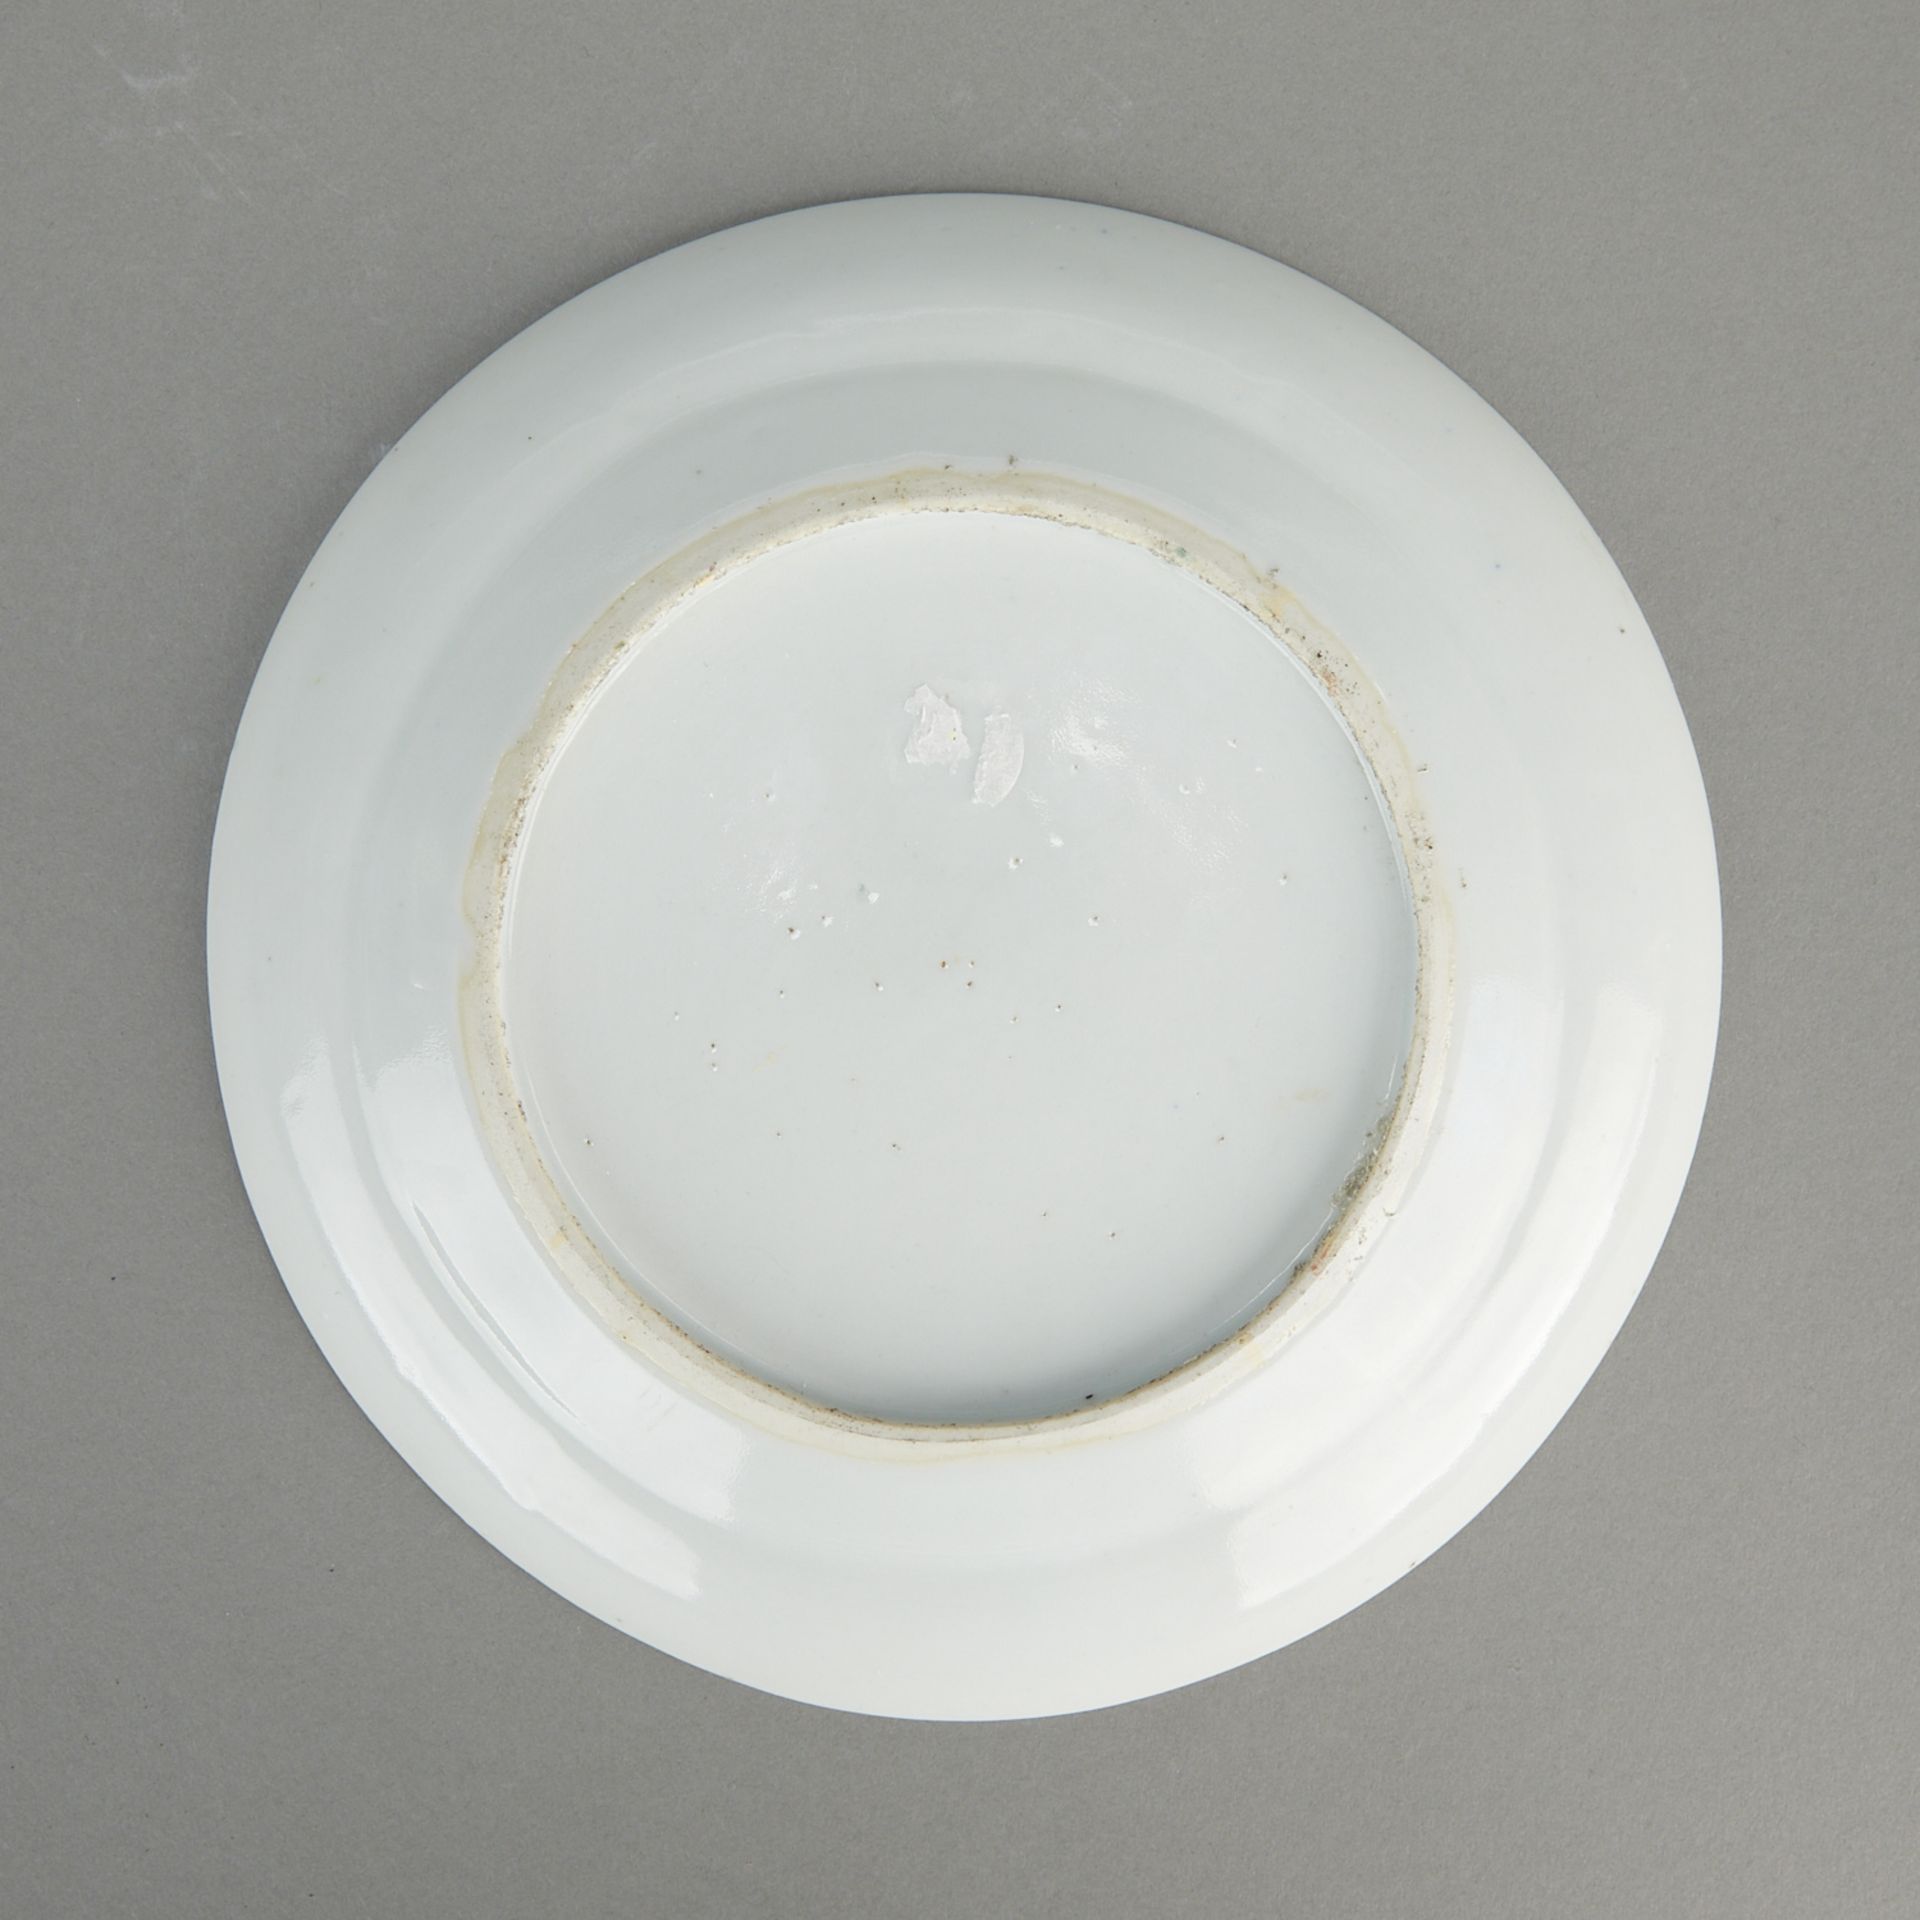 Chinese 19th/20th c. Famille Rose Porcelain Plate - Image 4 of 6